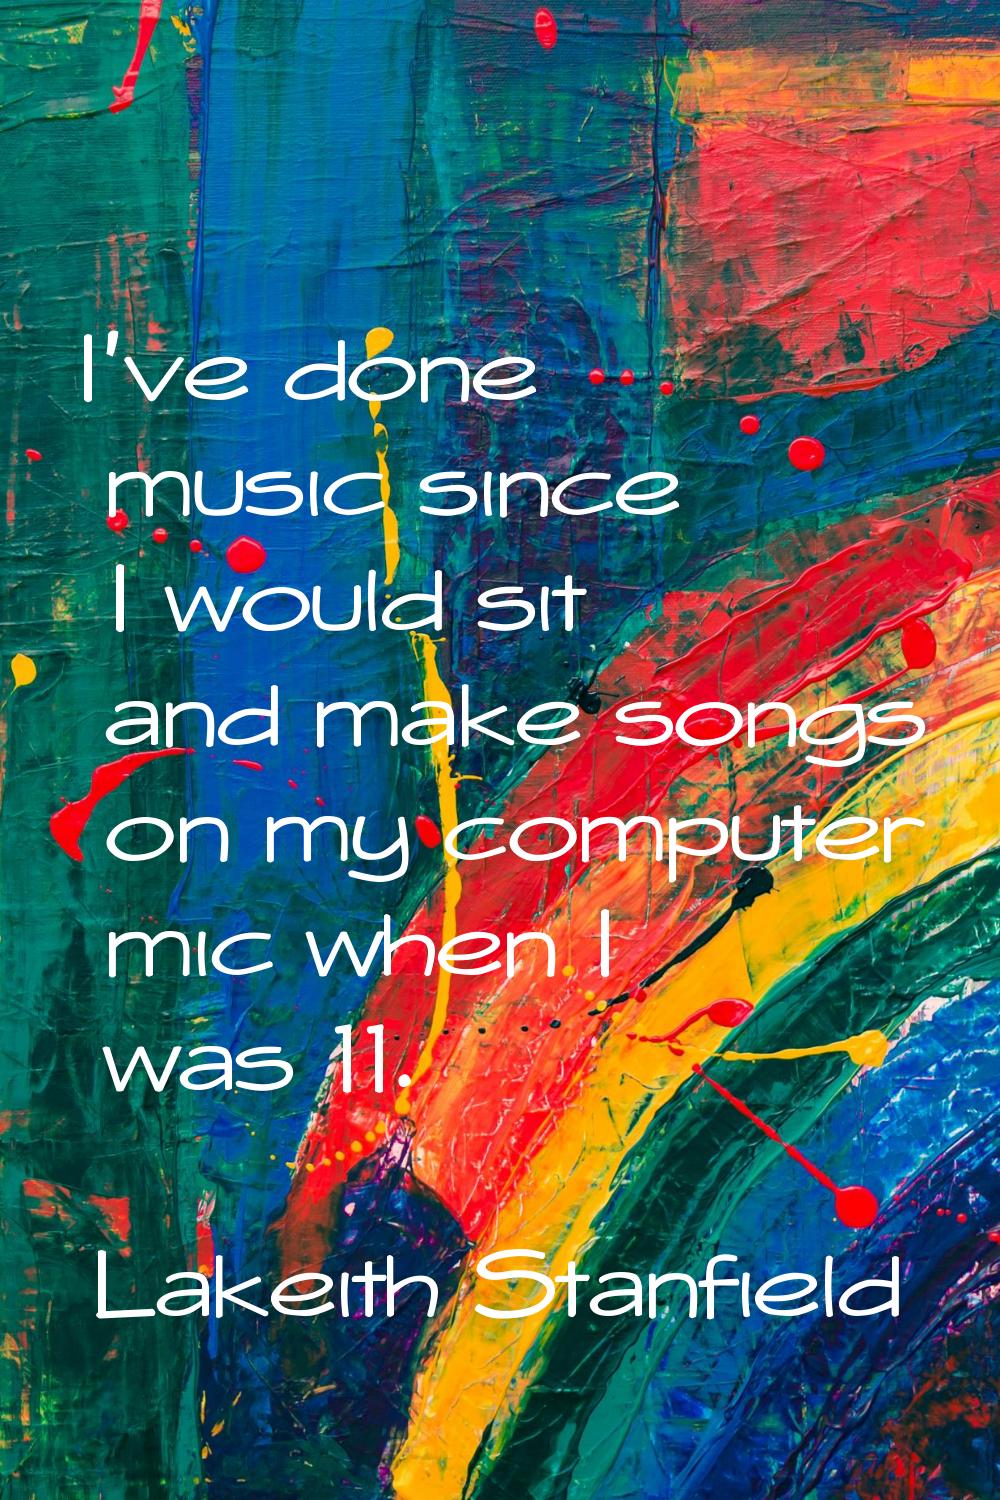 I've done music since I would sit and make songs on my computer mic when I was 11.